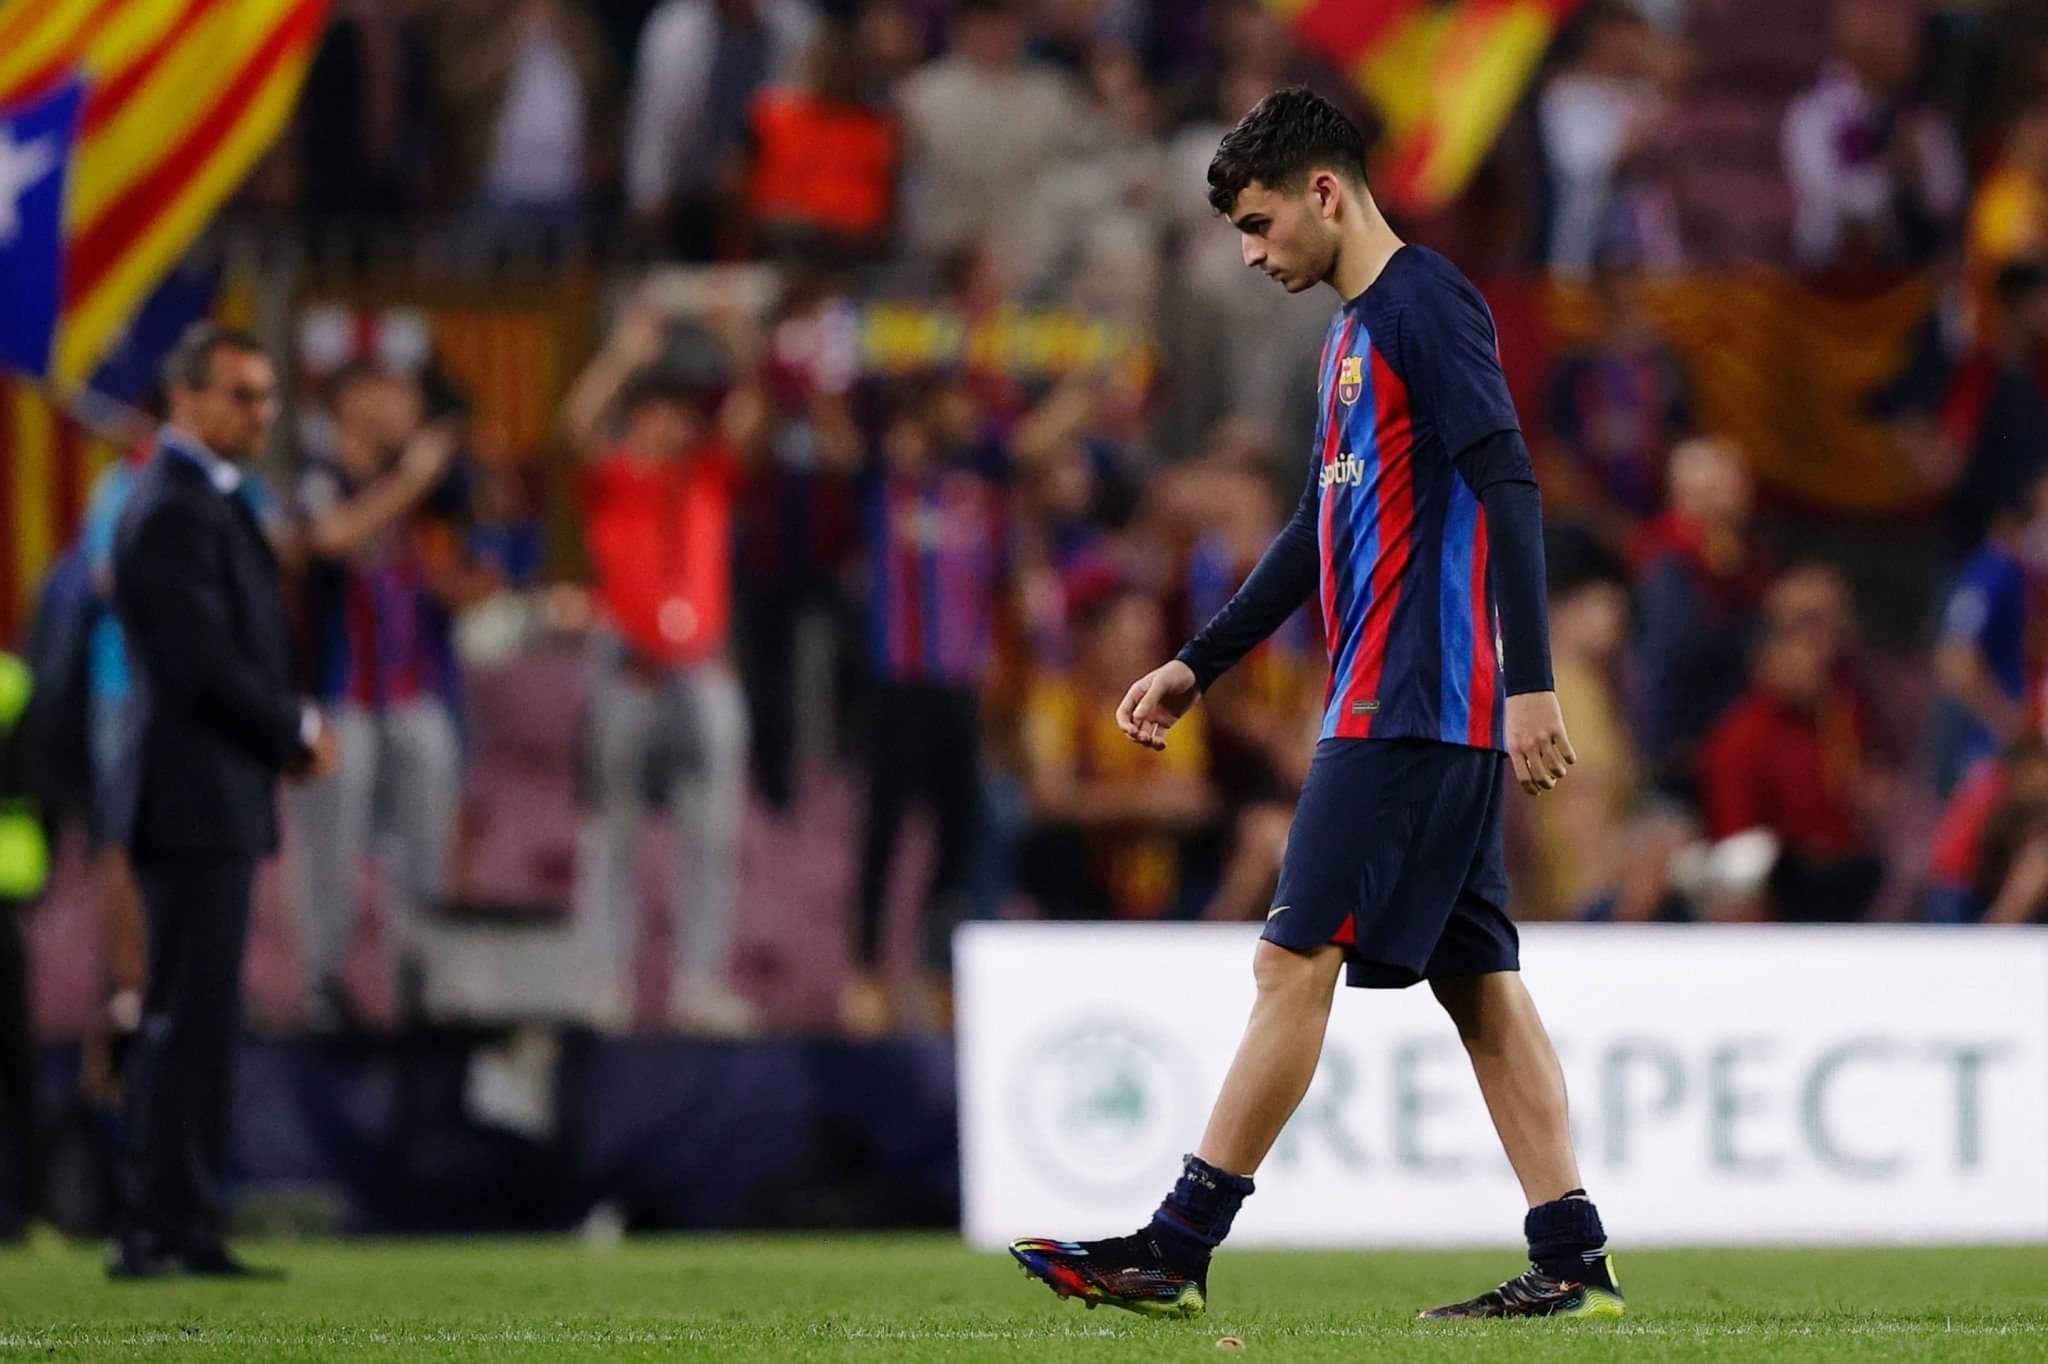 It has been confirmed that the Barcelona star was absent from the match against Real Madrid in El Clasico.